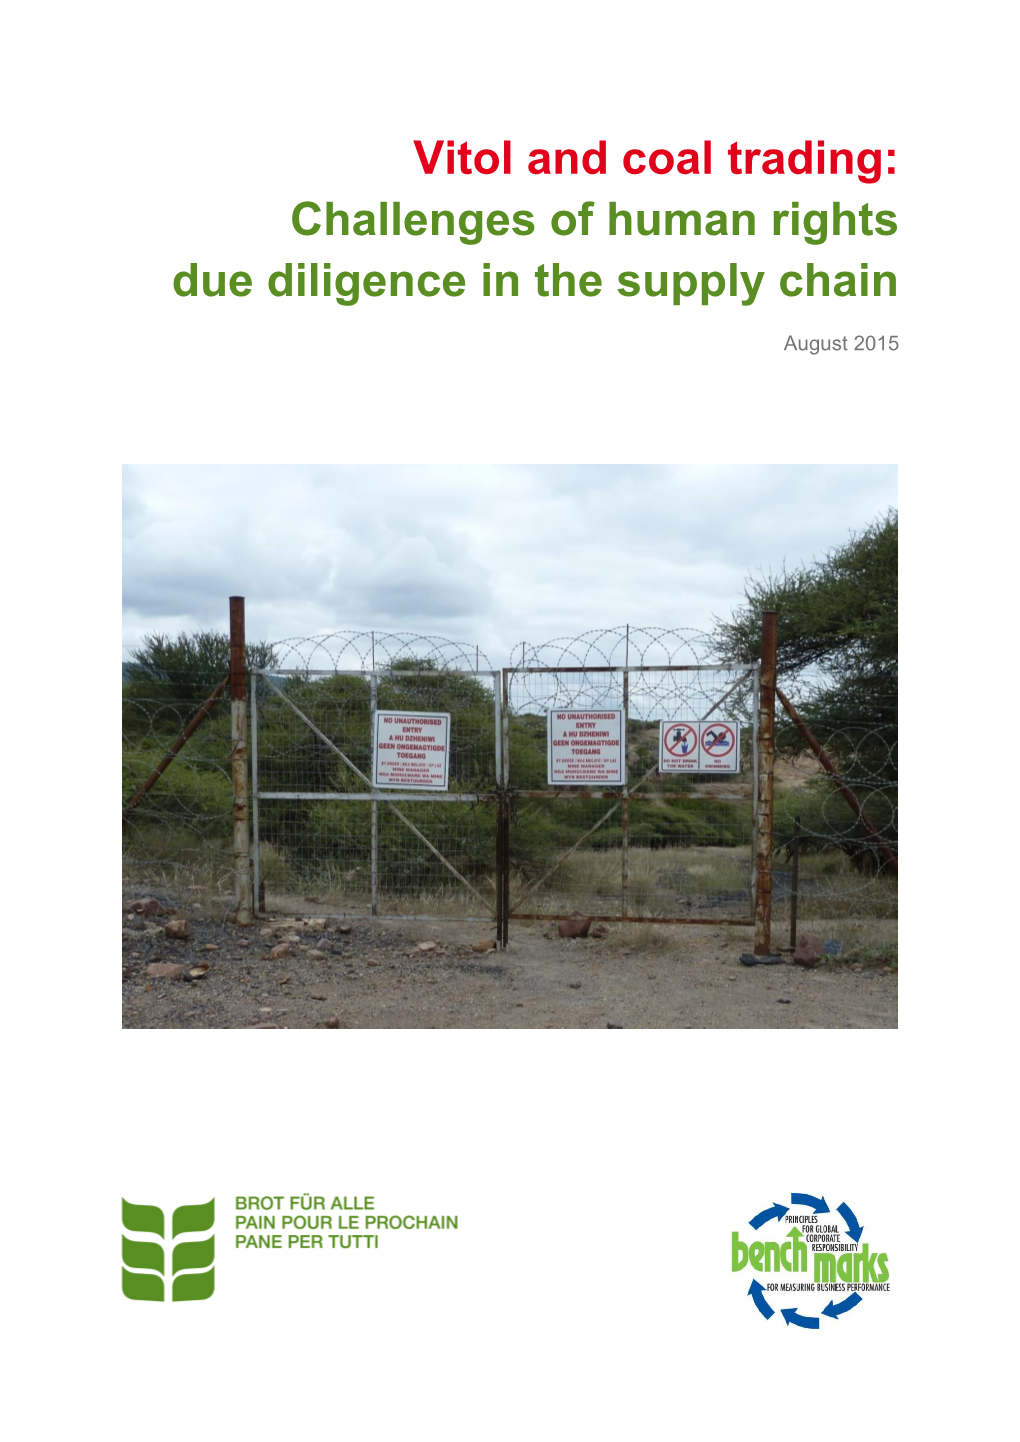 Vitol and Coal Trading: Challenges of Human Rights Due Diligence in the Supply Chain